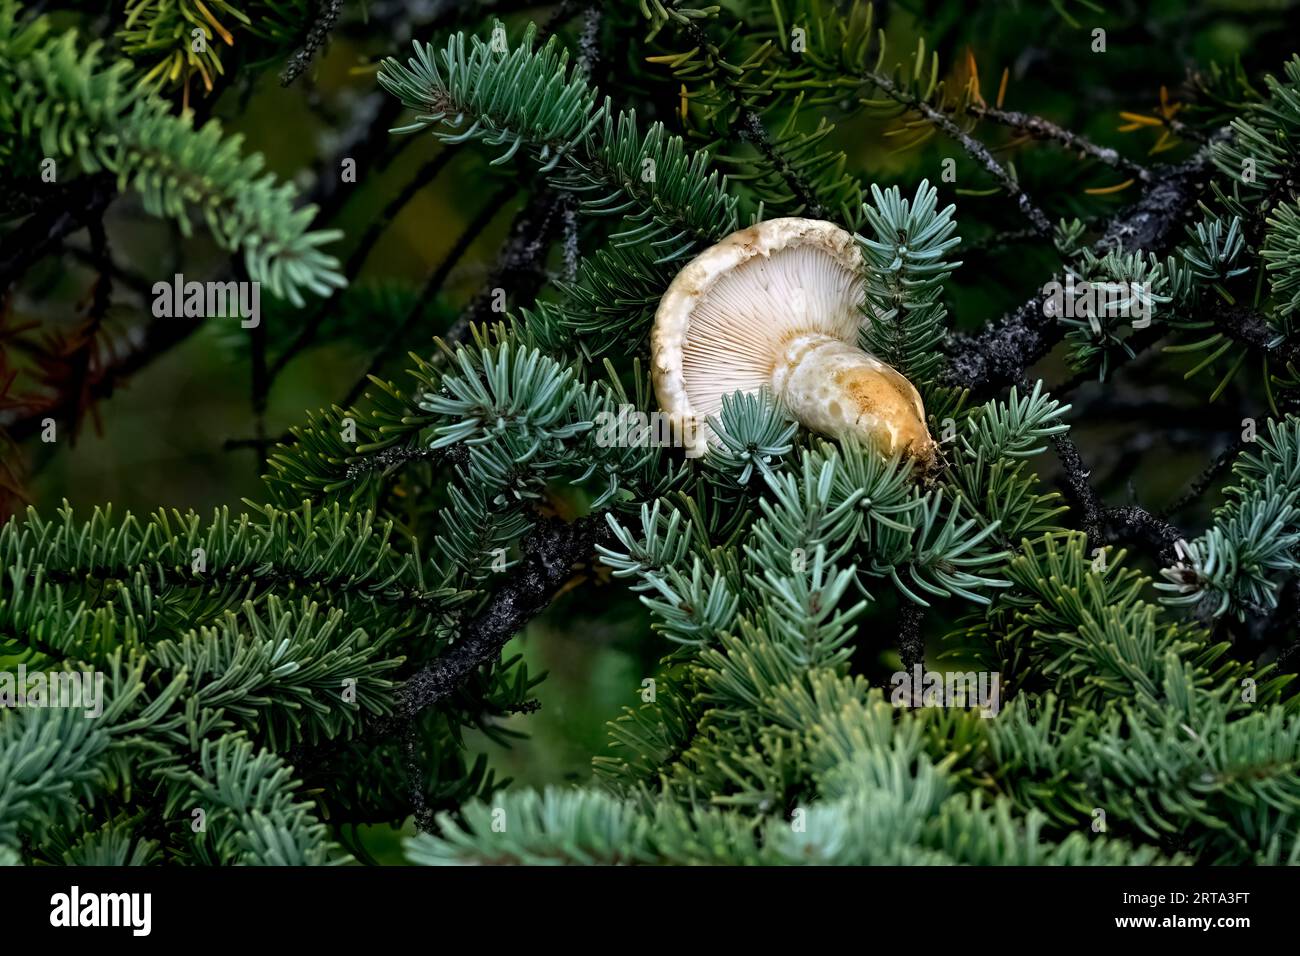 A mushroom that has been stored in a spruce tree by a squirrel to dry for the up coming winter food supply Stock Photo